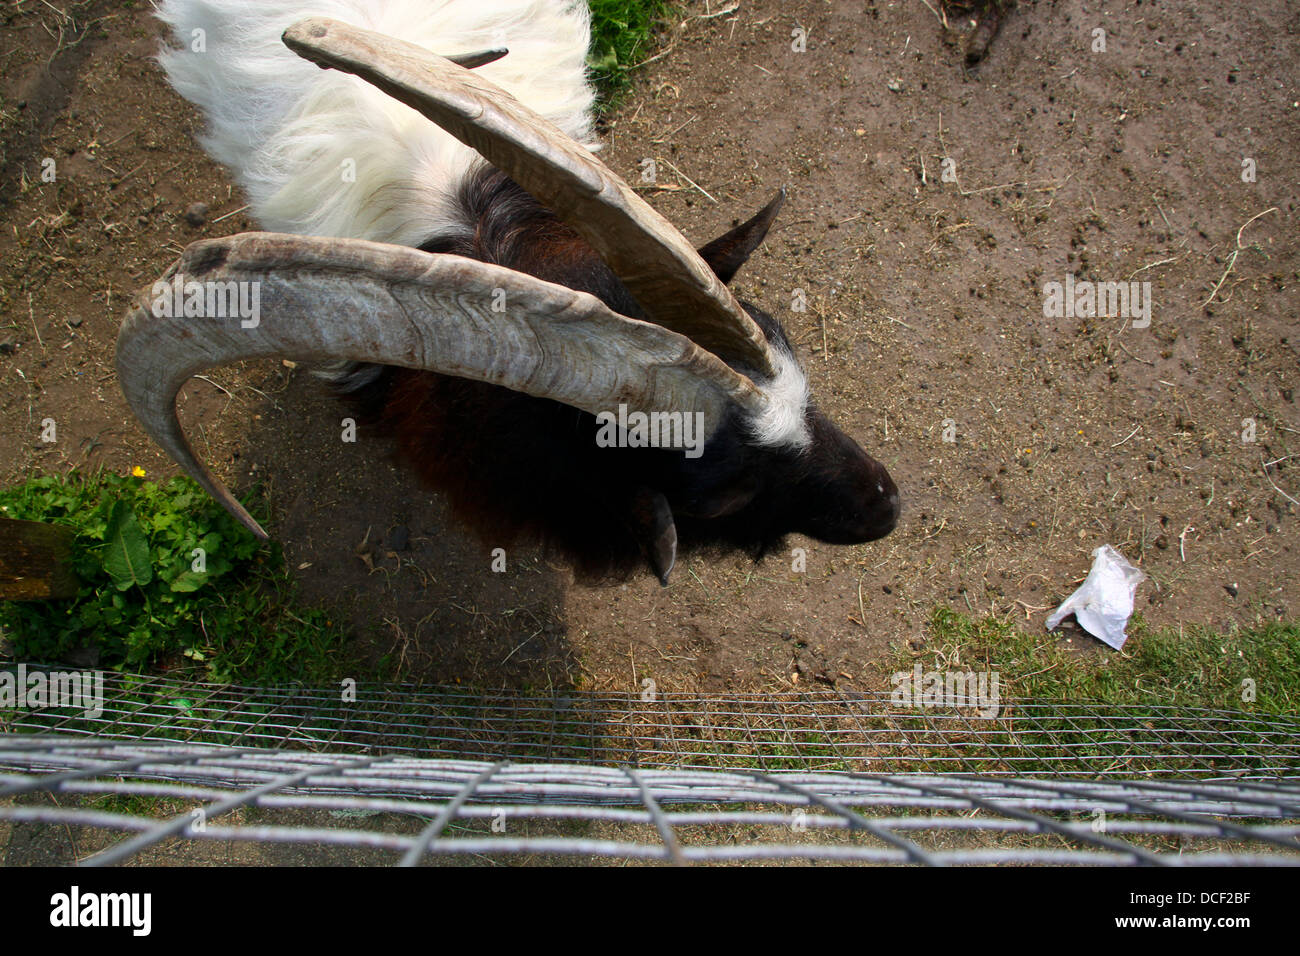 Top view of ram with large curved horns Stock Photo